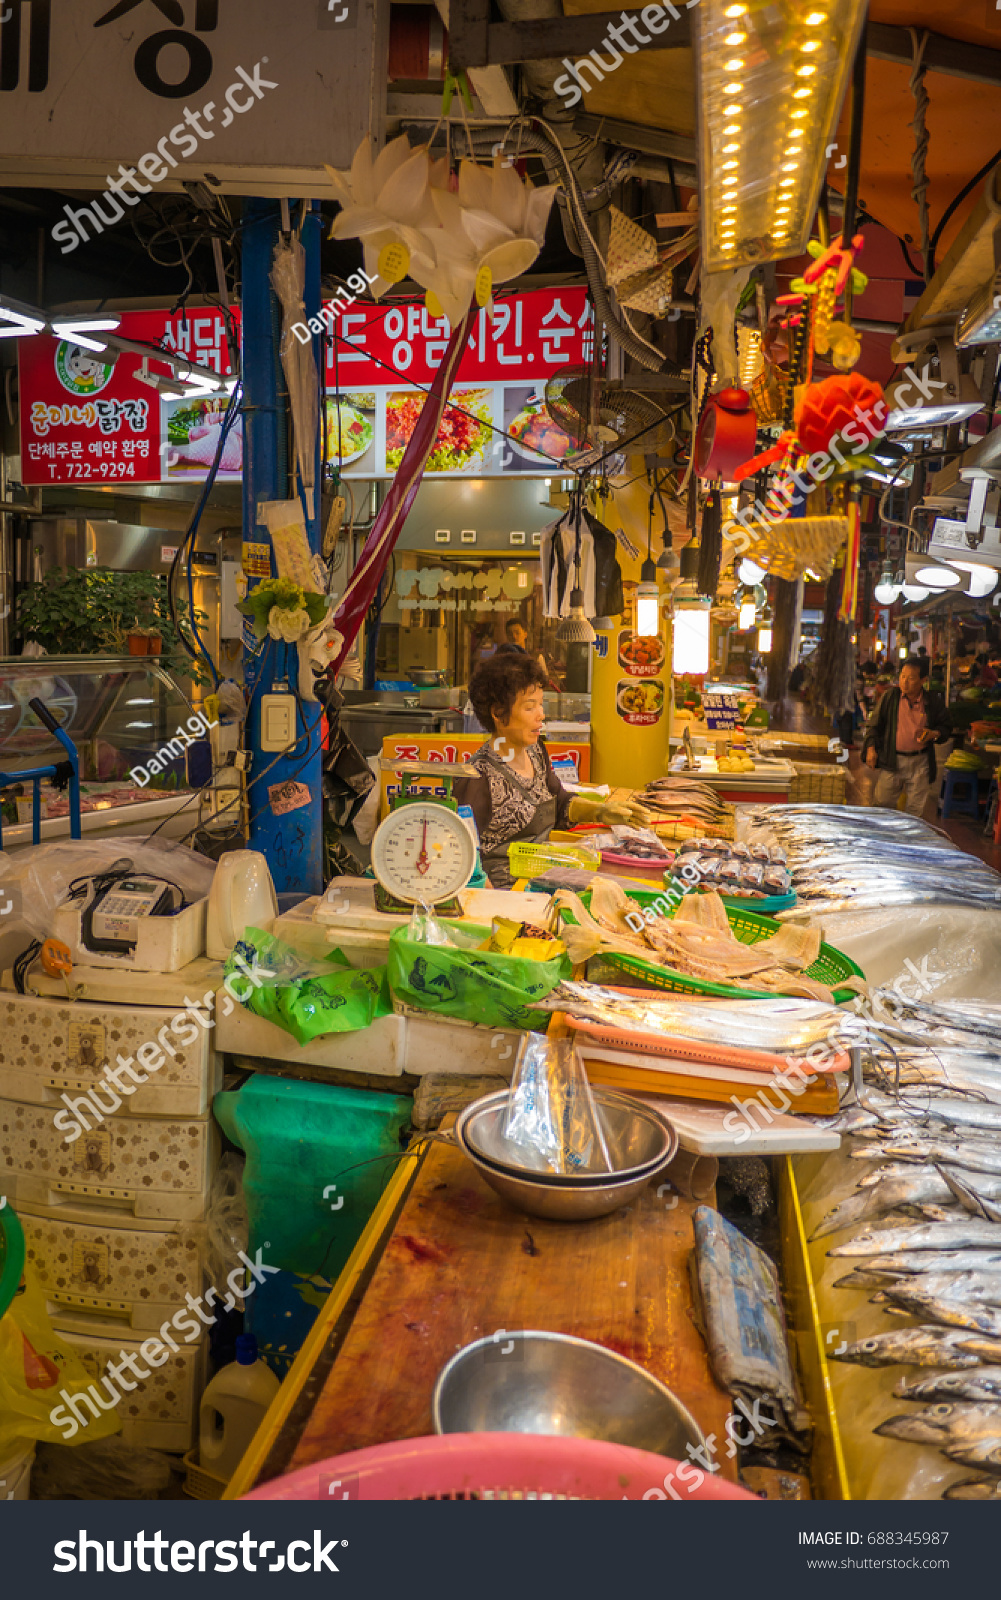 Jeju, South Korea - 29 September 2016: Jeju Dongmun Traditional Market. It has served countless customers in jeju with diverse items at inexpensive prices compared to regular marts or grocery stores. #688345987